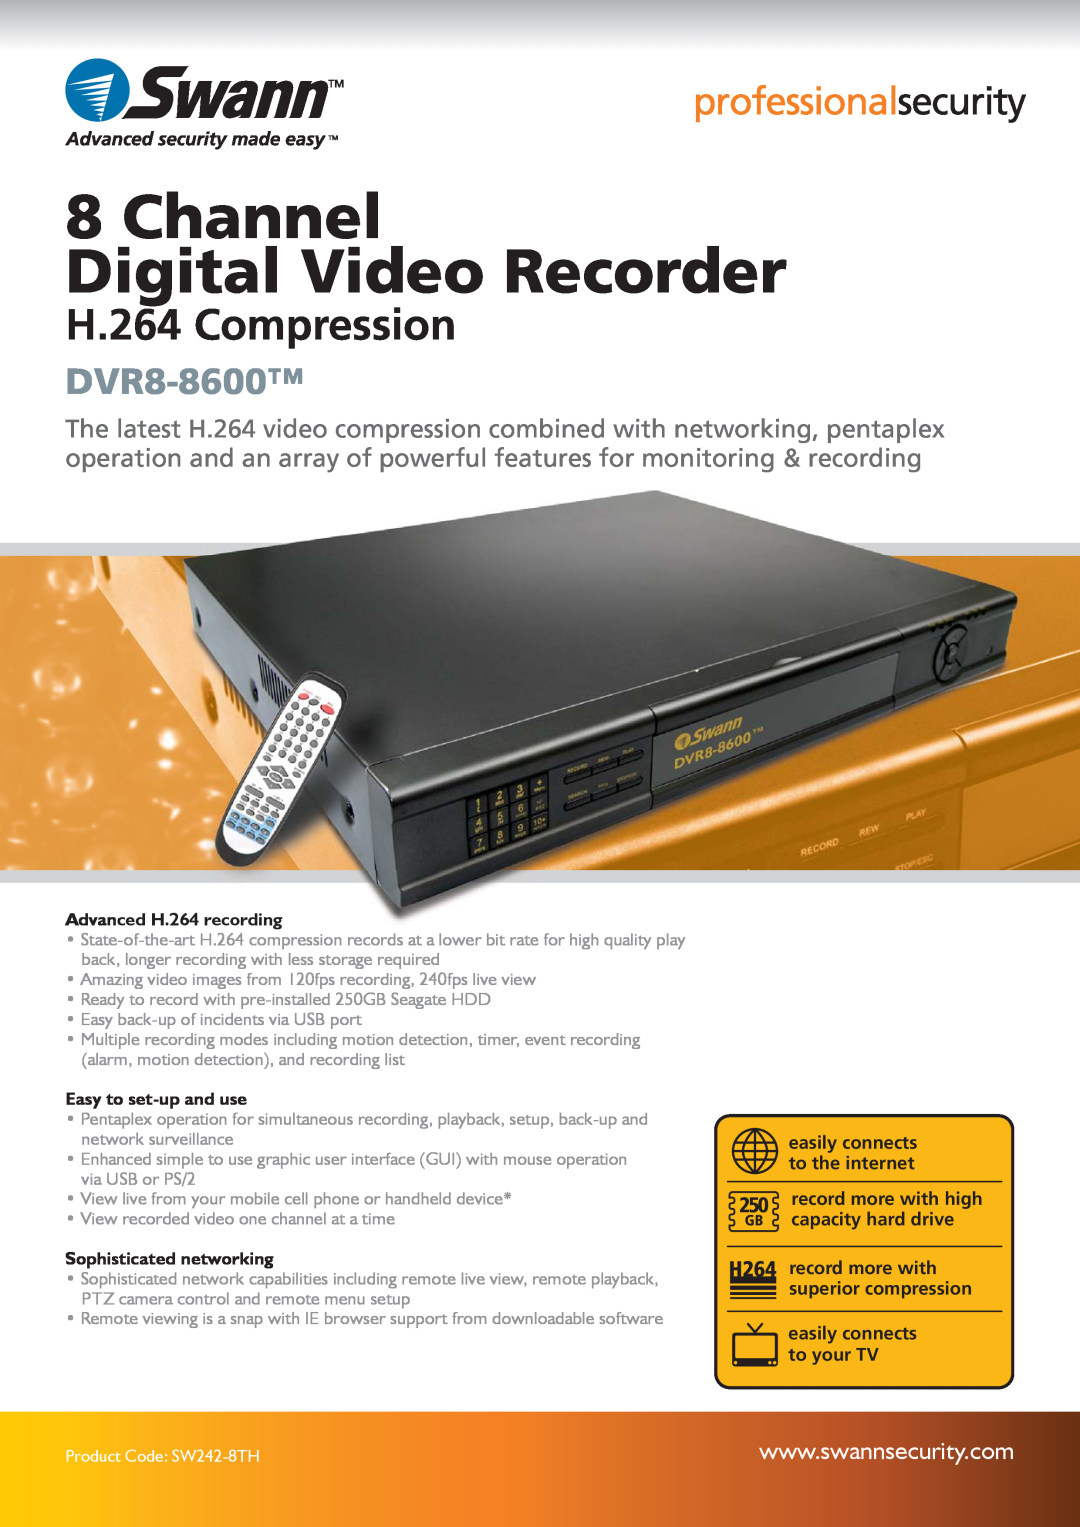 Swann DVR8-8600 manual H.264 Compression, Channel Digital Video Recorder, Advanced H.264 recording, Easy to set-up and use 